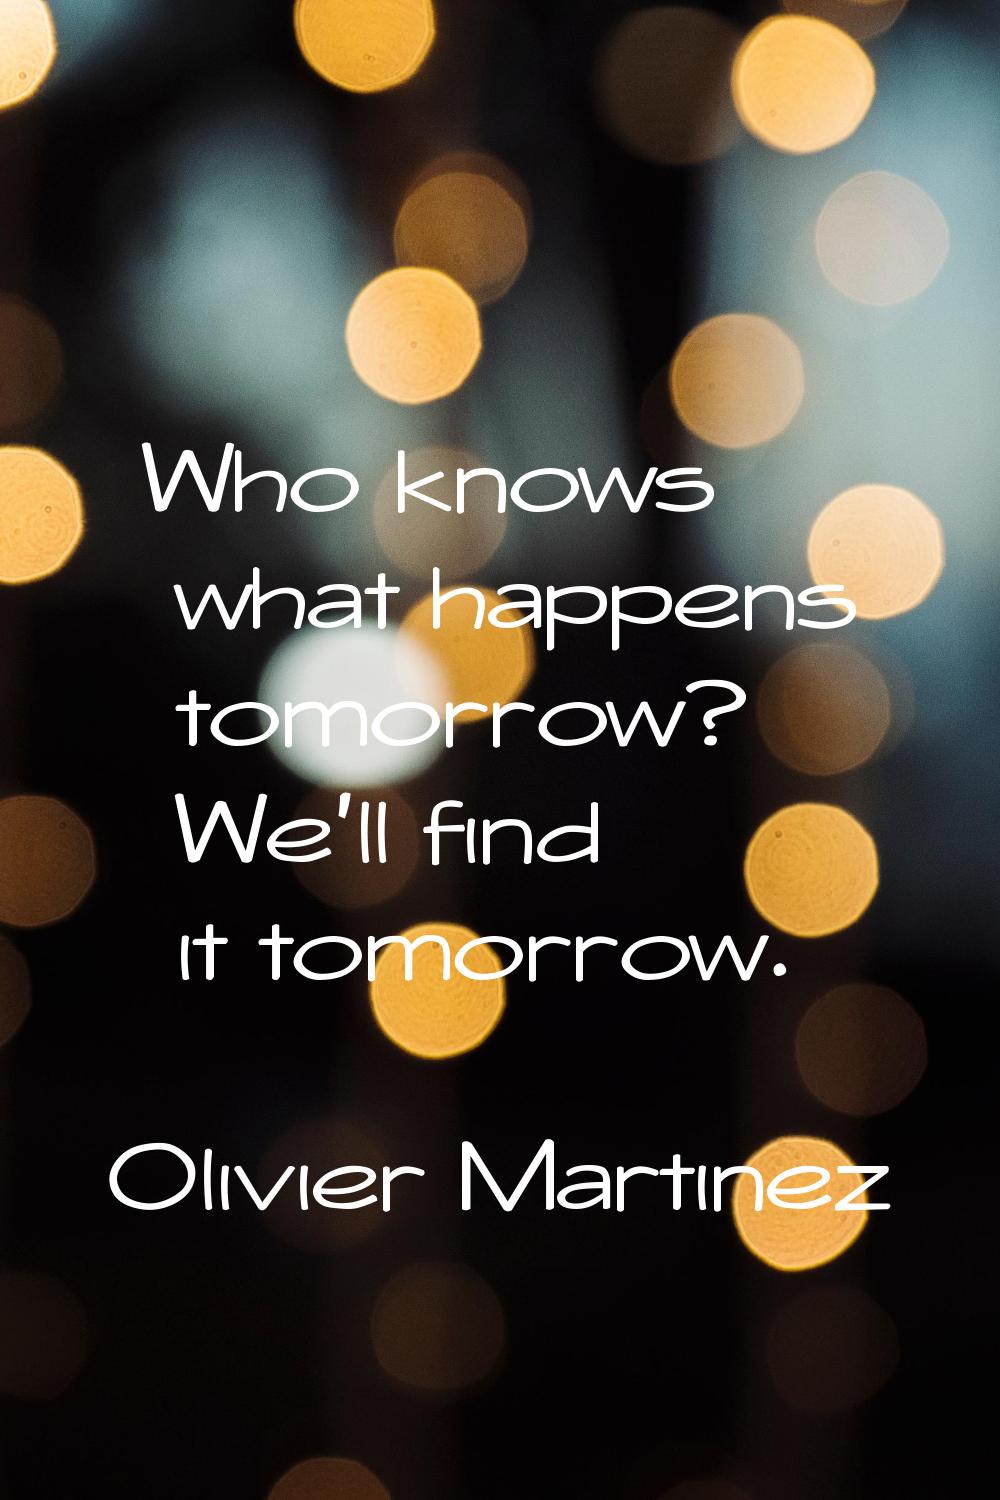 Who knows what happens tomorrow? We'll find it tomorrow.